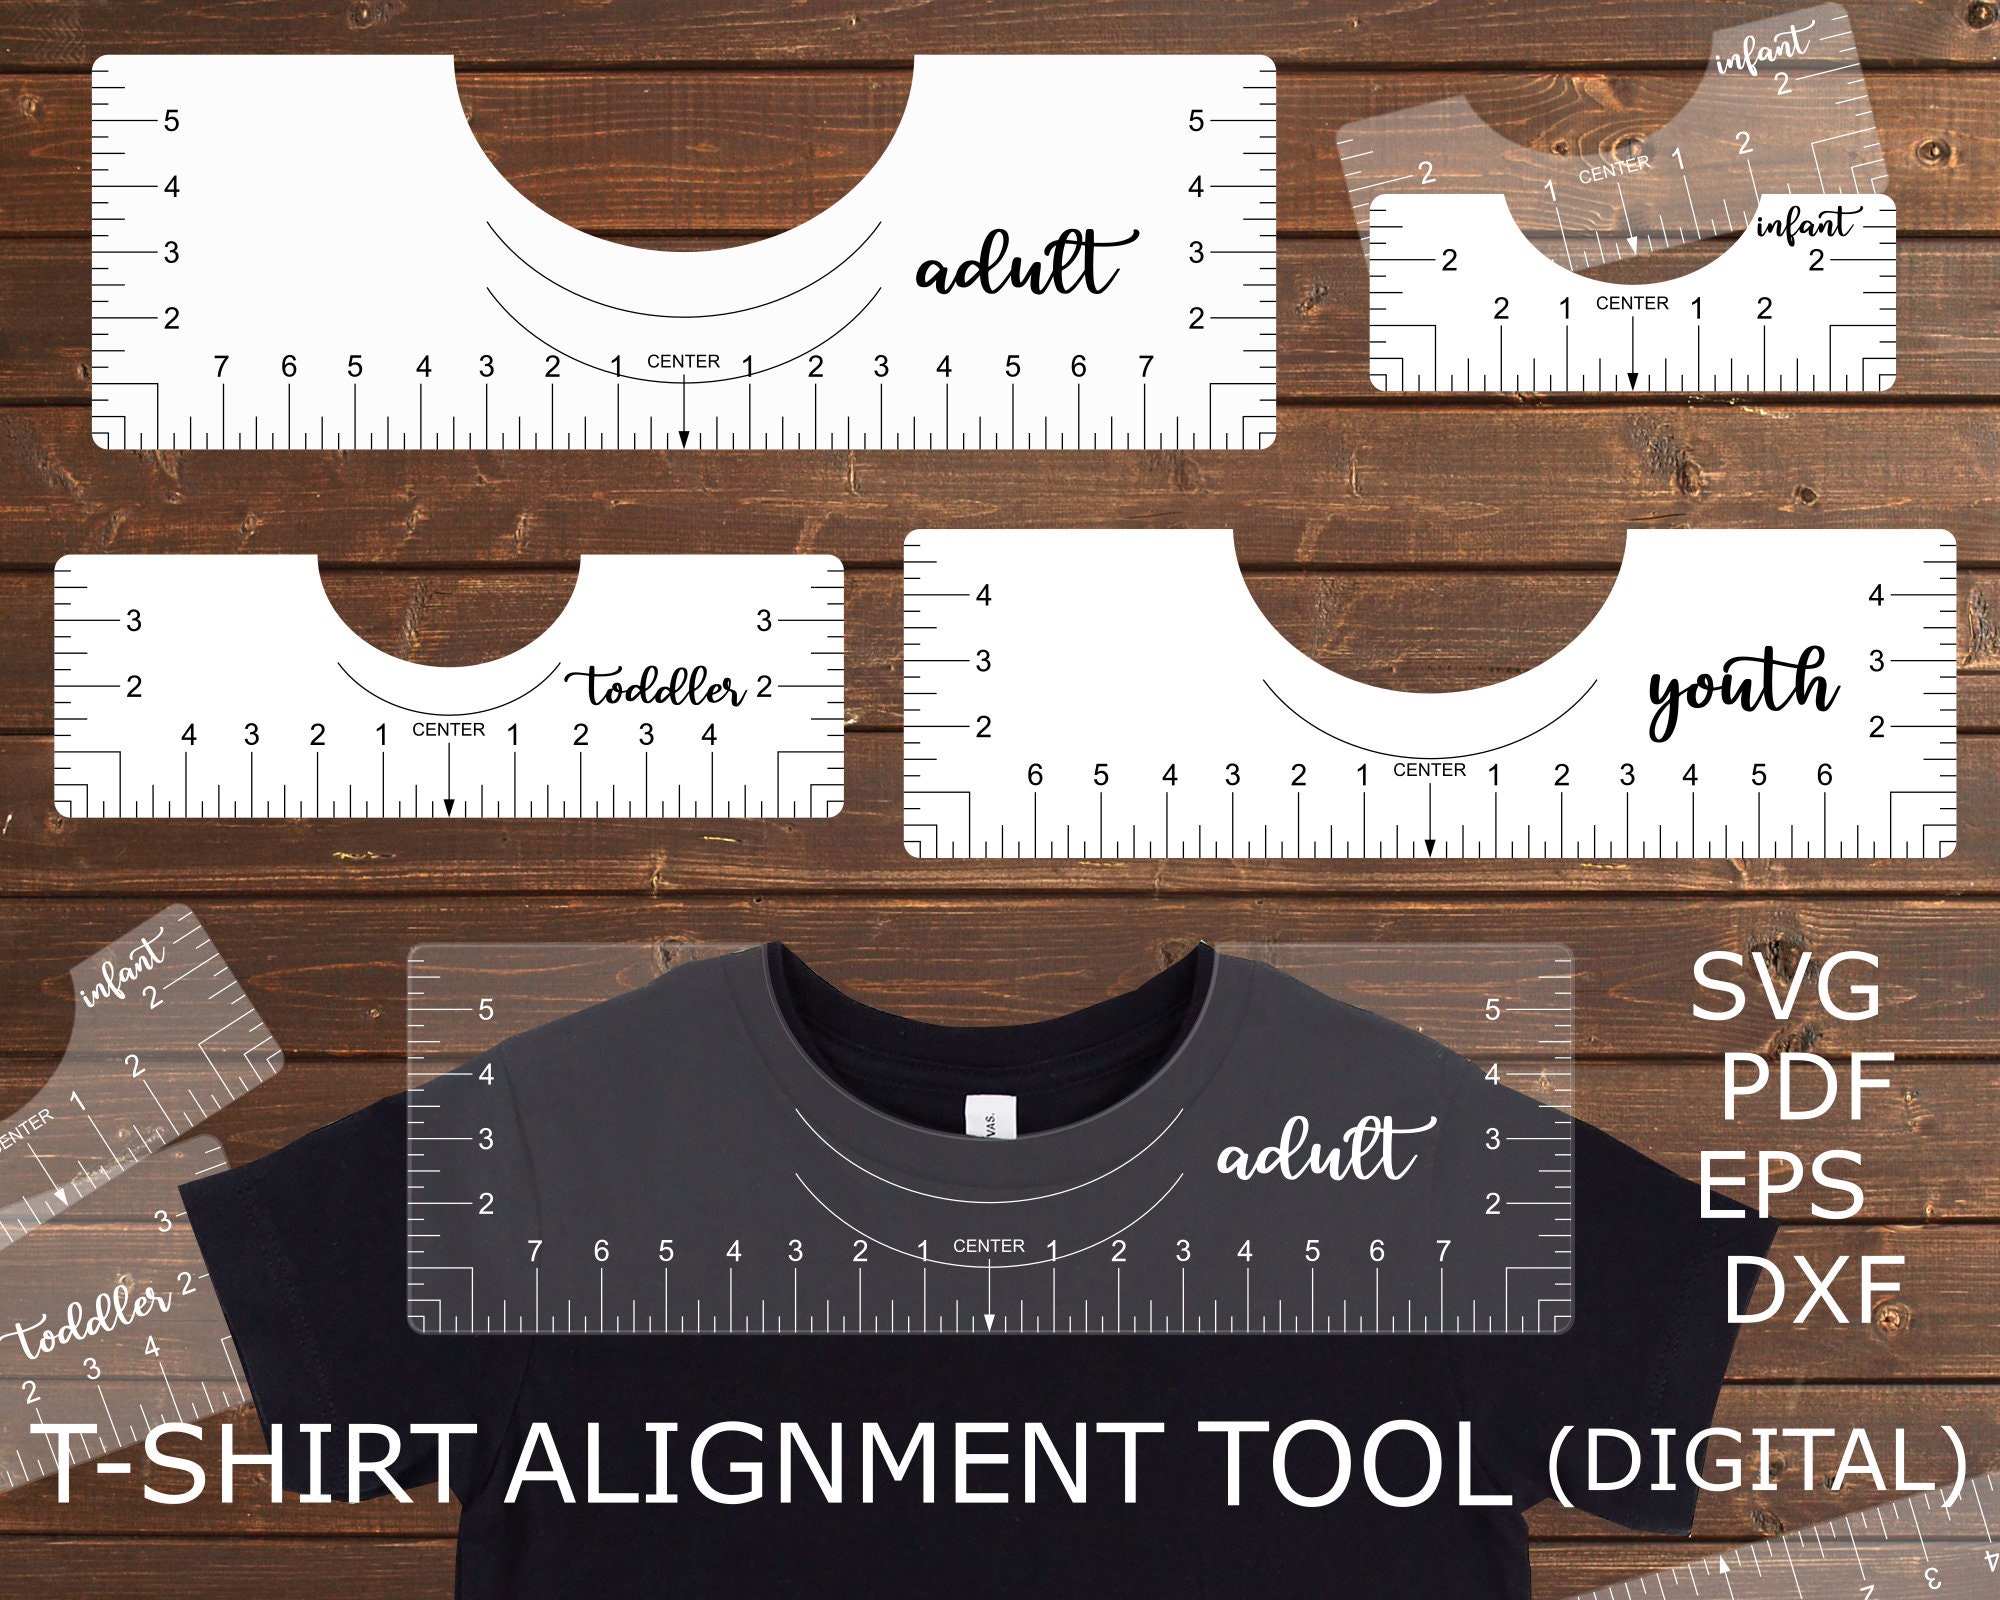 T-shirt Alignment Guide Bundle, Tshirt Alignment Tool SVG DXF File for  Cricut Silhouette, T-shirt Placement Graphic Guide, Shirt Ruler SVG 